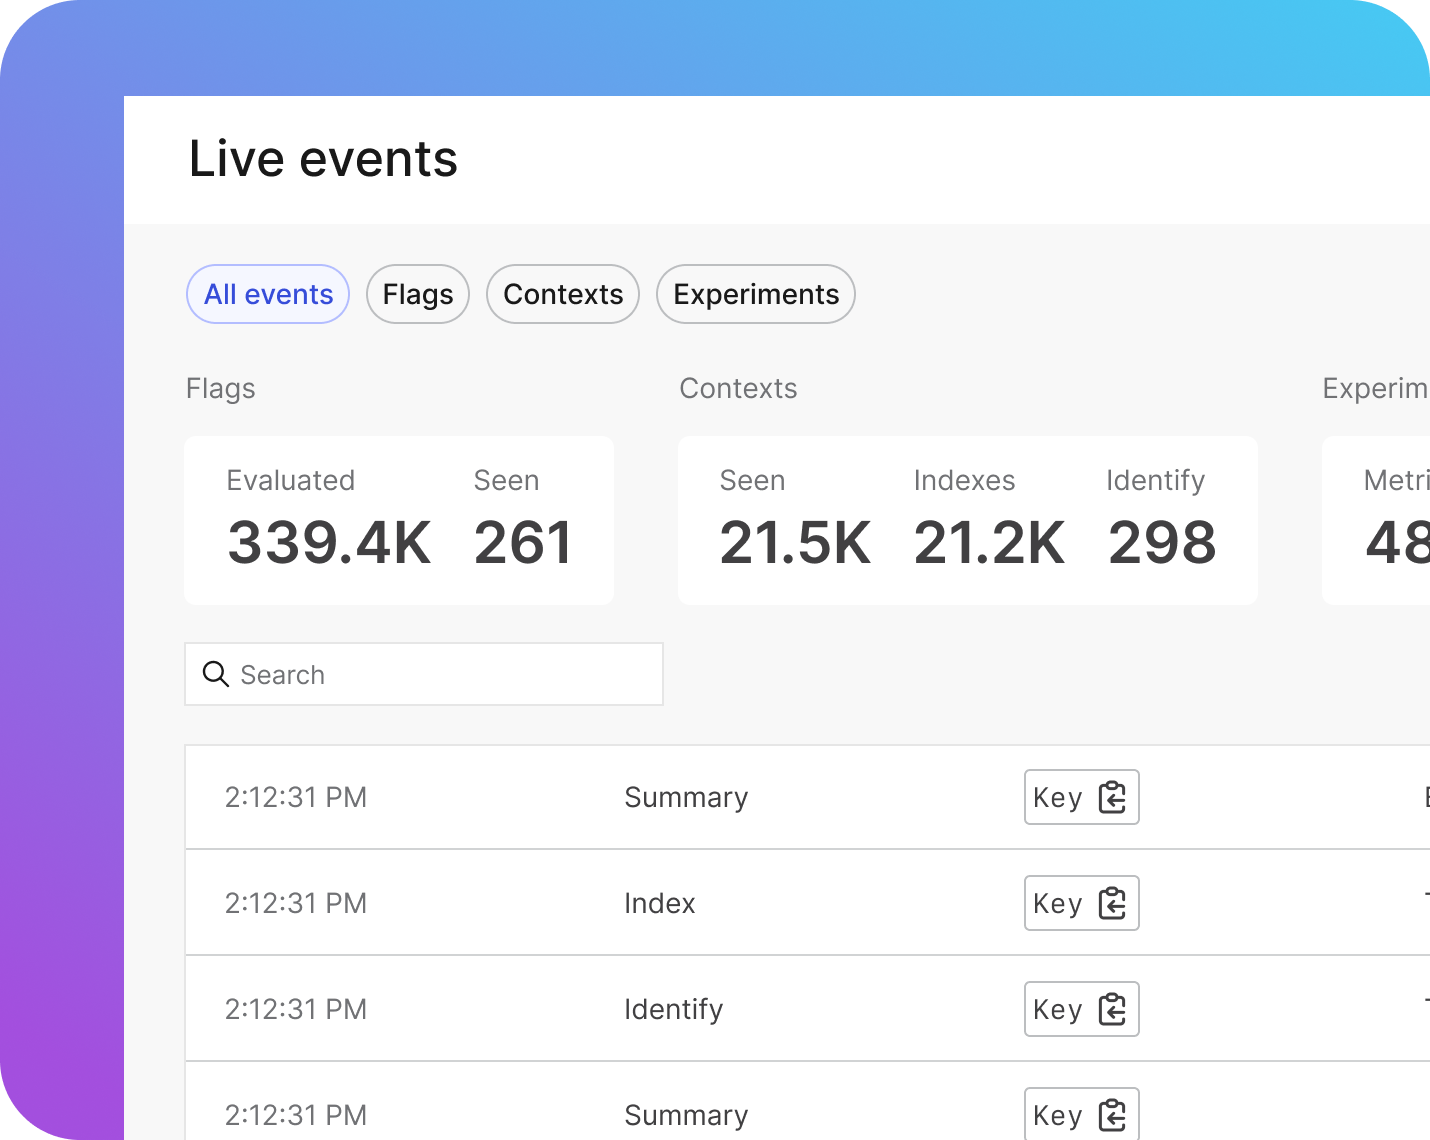 Live events: Real-time insight into the events your application is sending to LaunchDarkly, so you can ensure that you've set up LaunchDarkly correctly. Different types of events appear, in detail or in summary, depending on what you want to view.